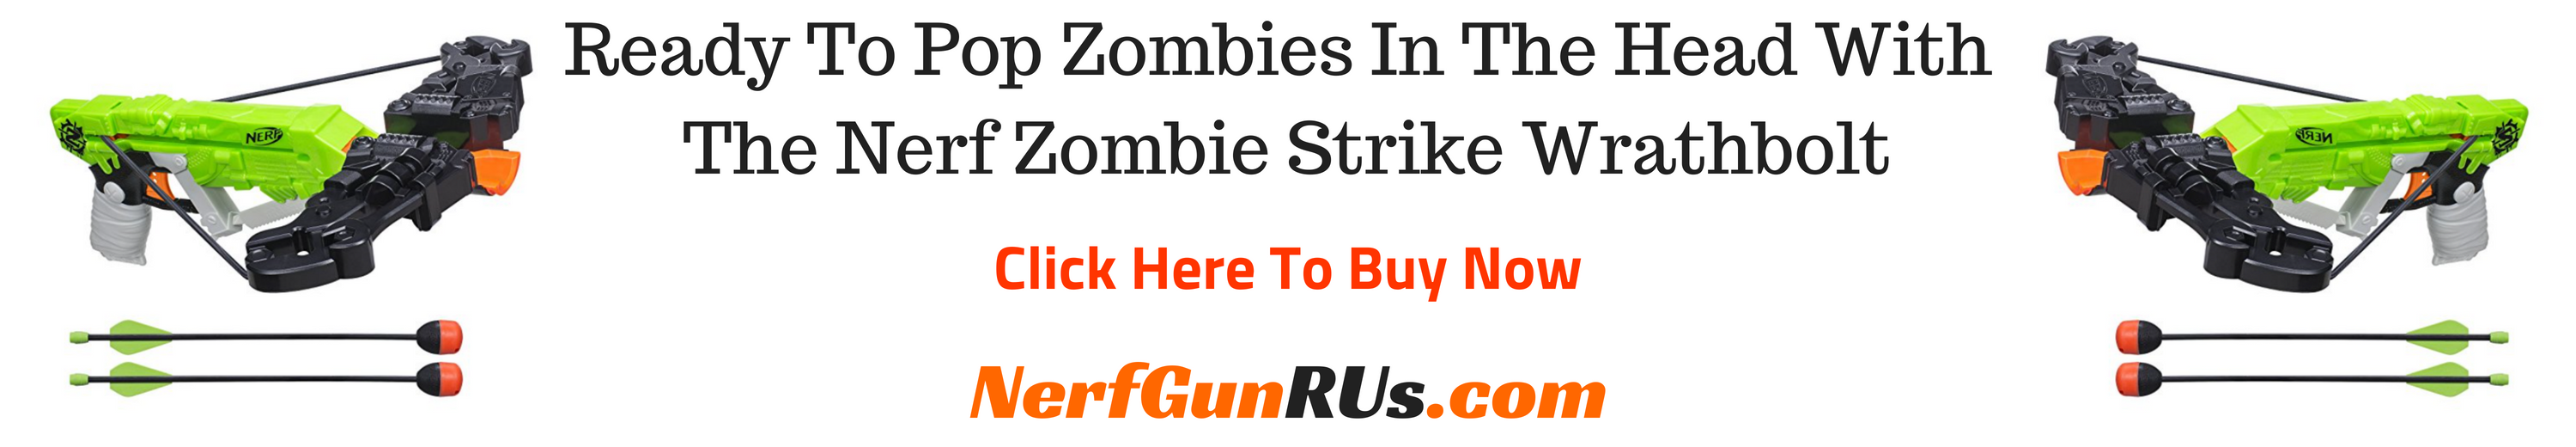 Ready To Pop Zombies In The Head With The Nerf Zombie Strike Wrathbolt